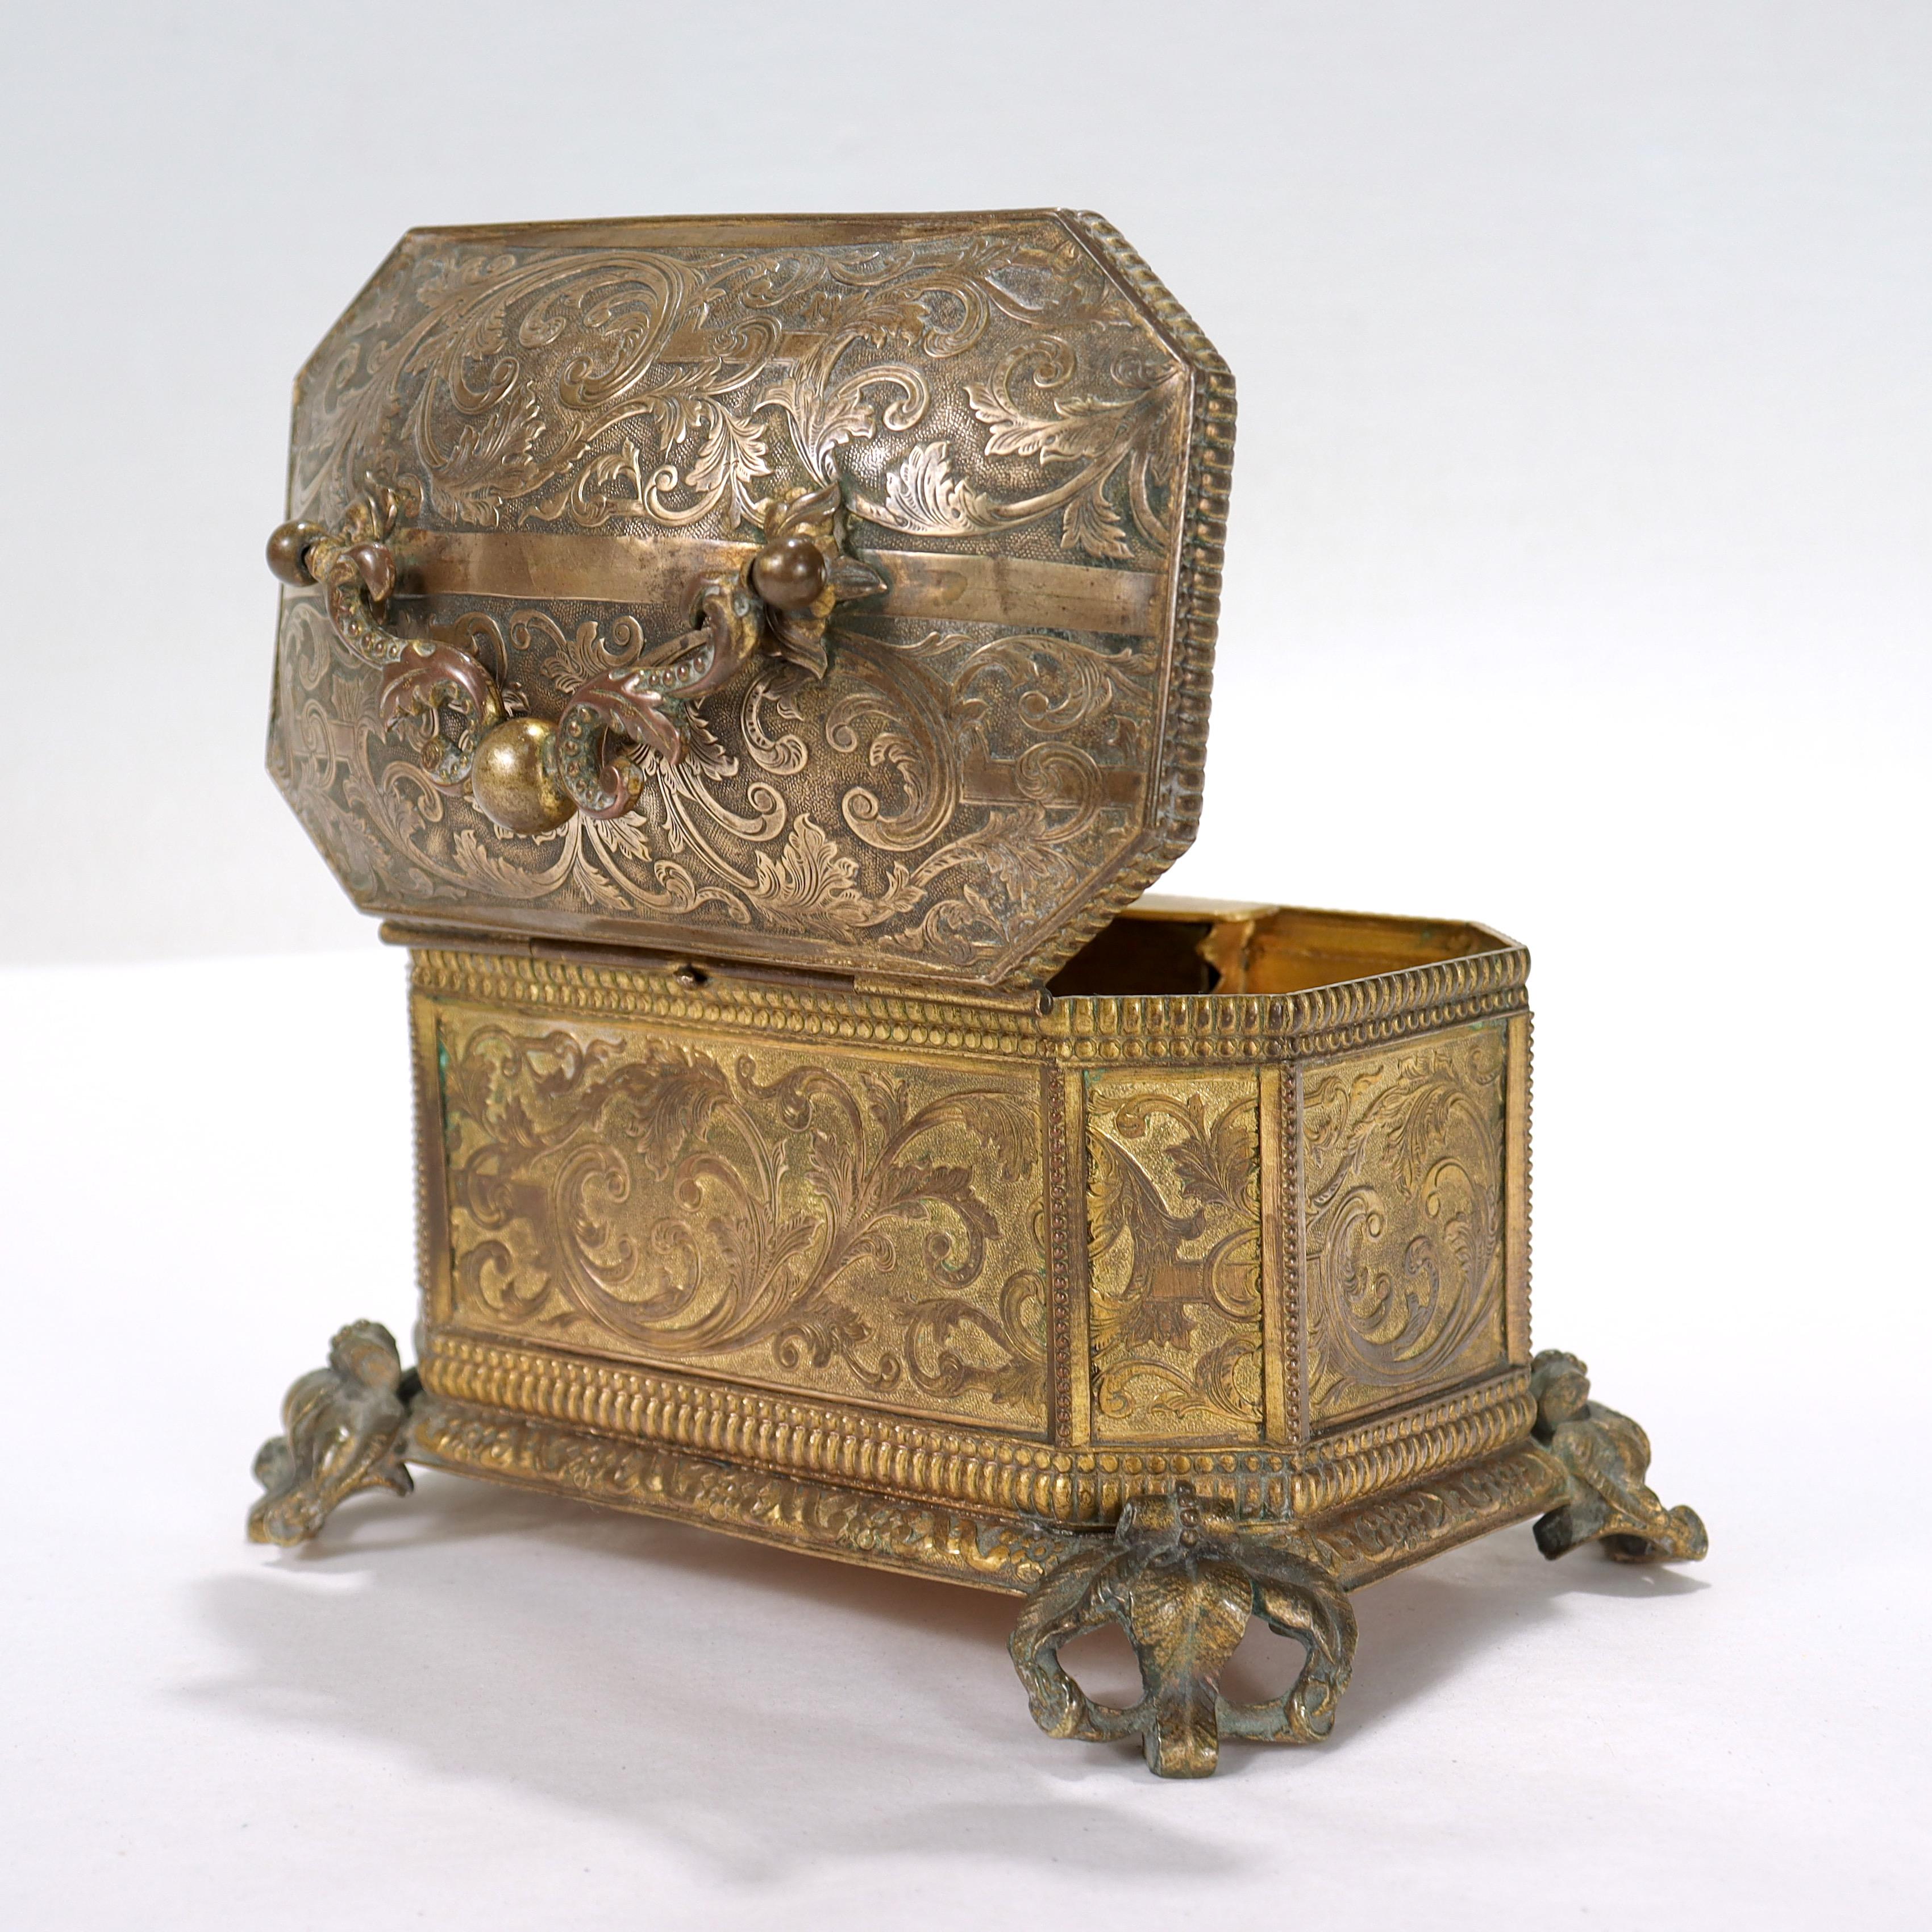 Antique 19th Century Brass Renaissance Revival Casket or Table Box In Fair Condition For Sale In Philadelphia, PA